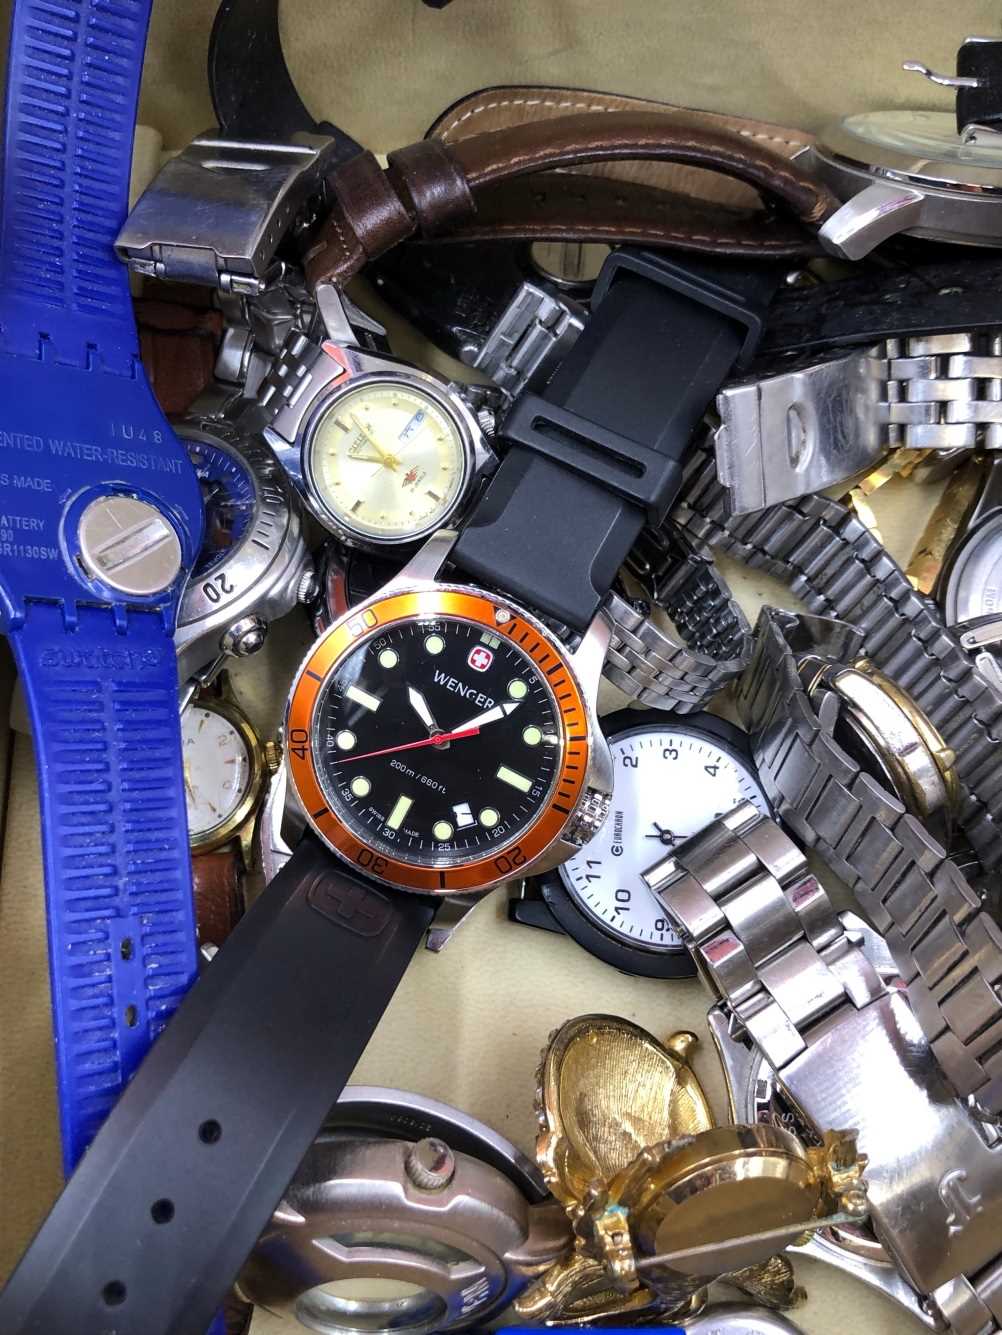 A collection of wristwatches to include Fossil, Casio, D&G, Focus, Sekonda, Storm, Samsung Gear S2 - Bild 2 aus 5